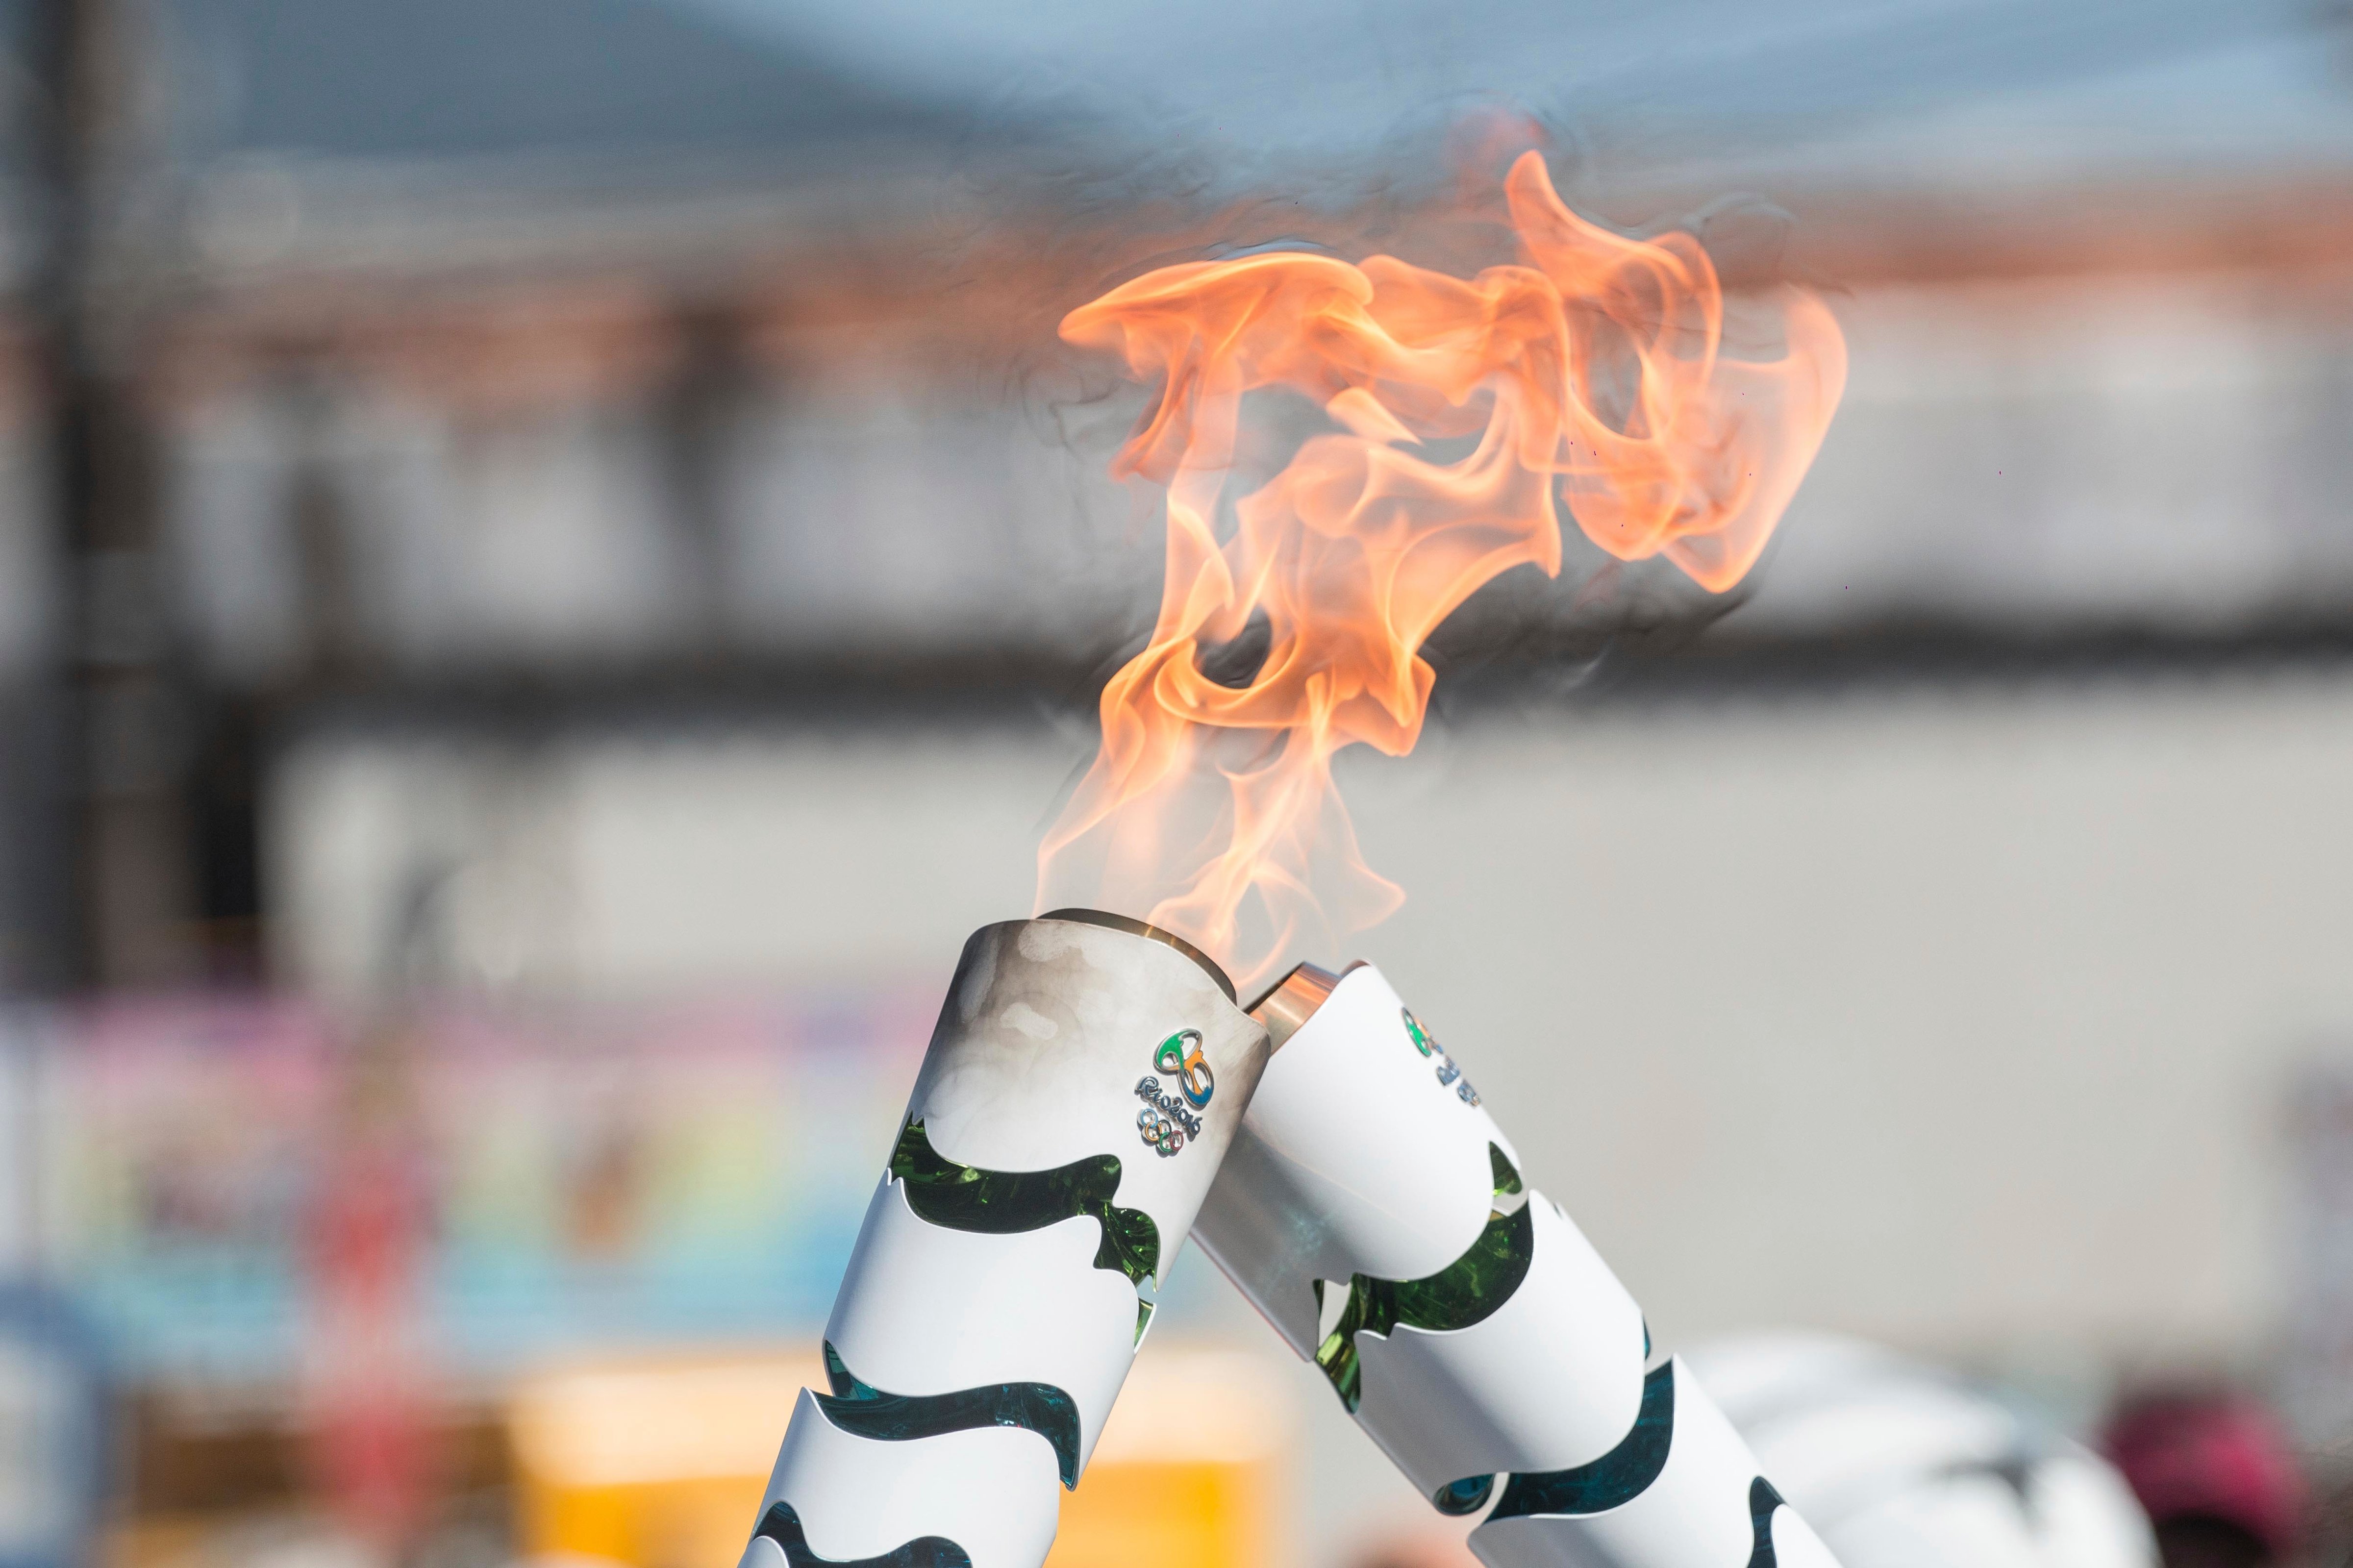 The Olympic torch and flames during Official Torch Relay on July 23, 2016 in Ubatuba, , Brazil. (Ale Meirelles—Brazil Photo Press/LatinContent/Getty Images)